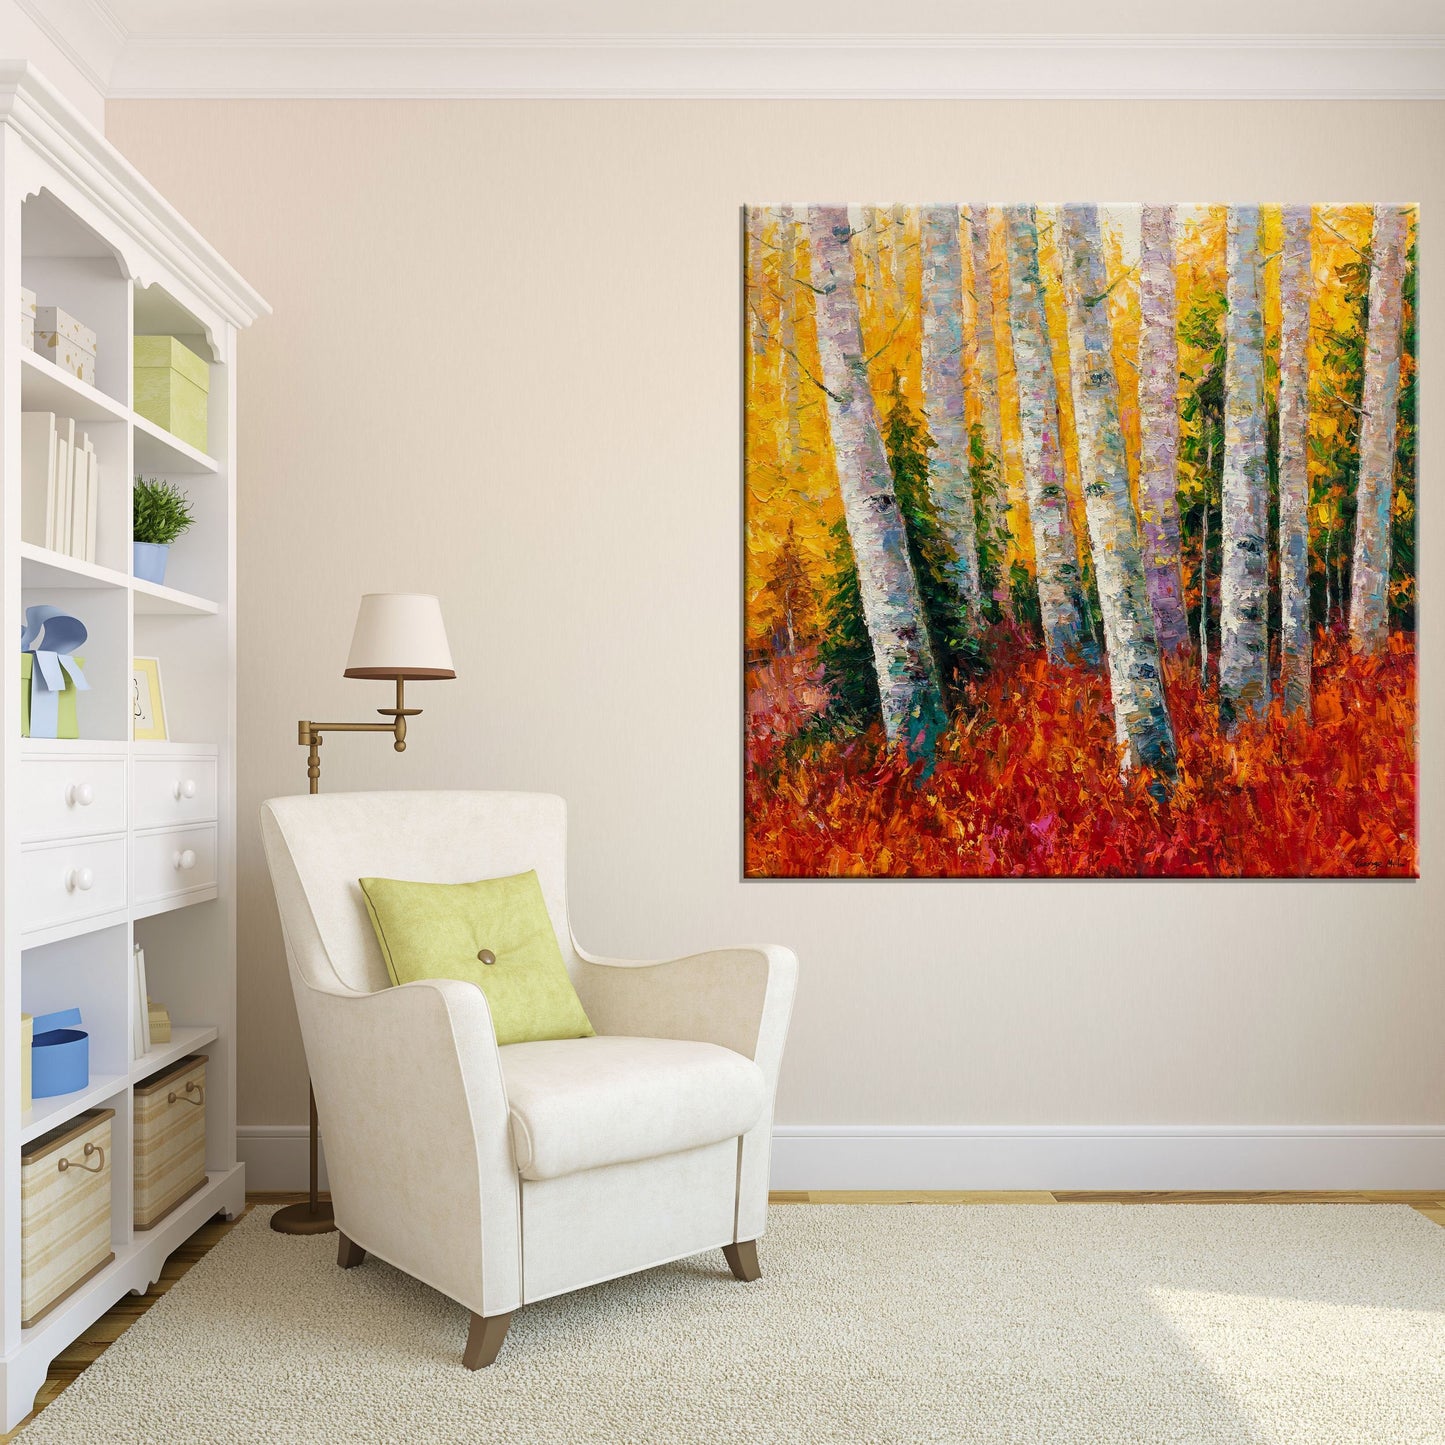 Oil Painting White Birch Trees Autumn, Landscape Wall Art, Large Canvas Art, Rustic Oil Painting, Textured Painting, Original Artwork